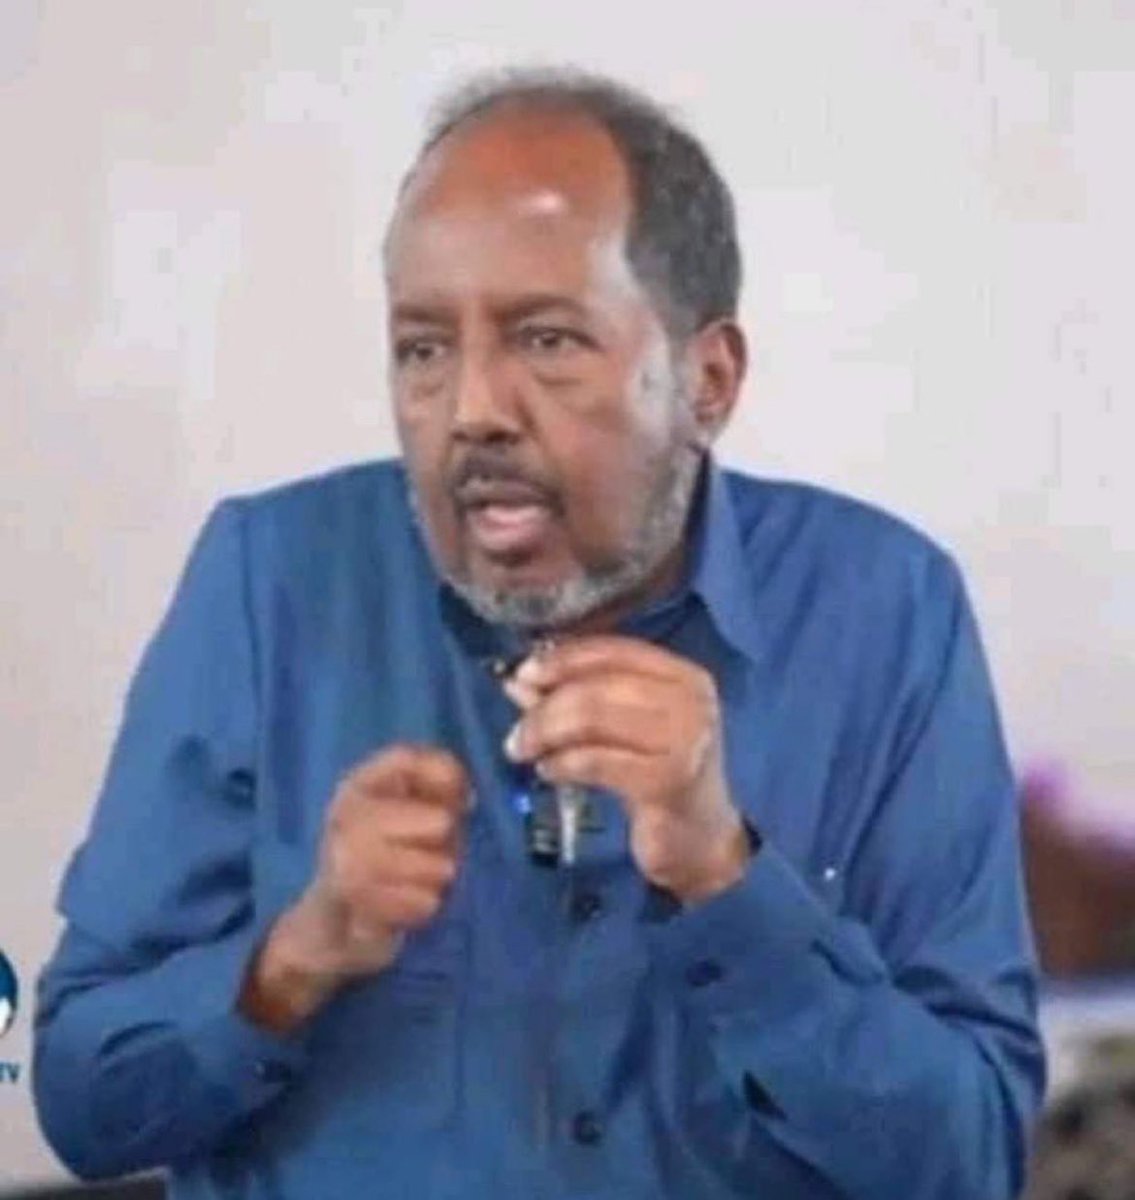 If Somaliland is recognized. Other Somalis will join al-Shabaab 
#Hasansheekh Said.
   Lets call him #Exterimist and Alshabab Member.

#RecogniseSomalilandNow